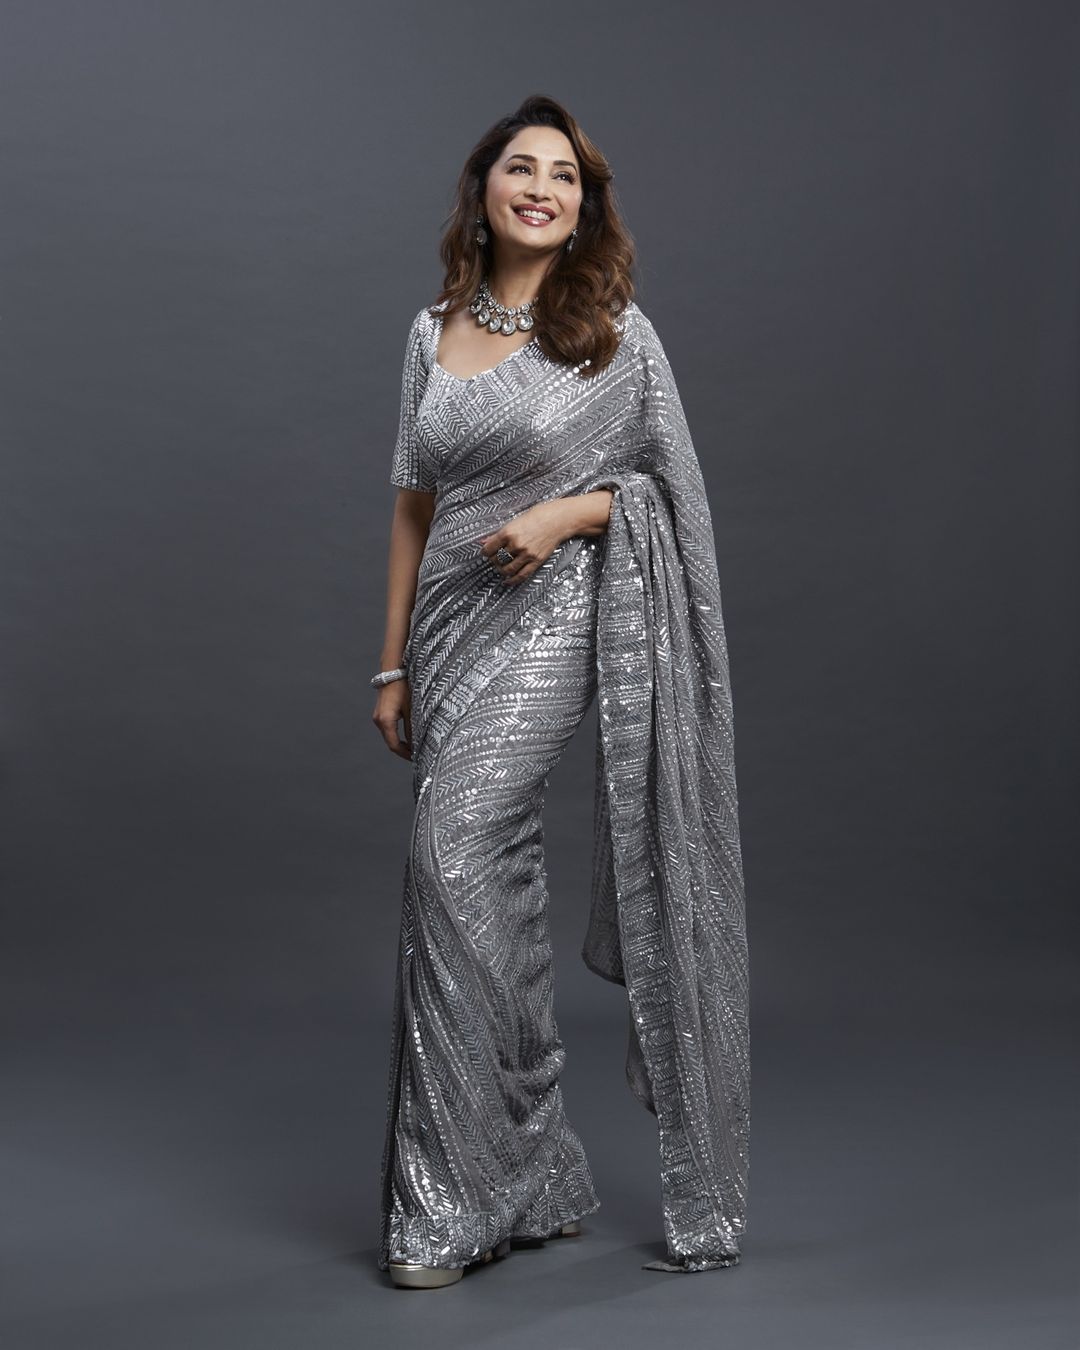 Madhuri Dixit looks chic in the shimmering silver saree. 